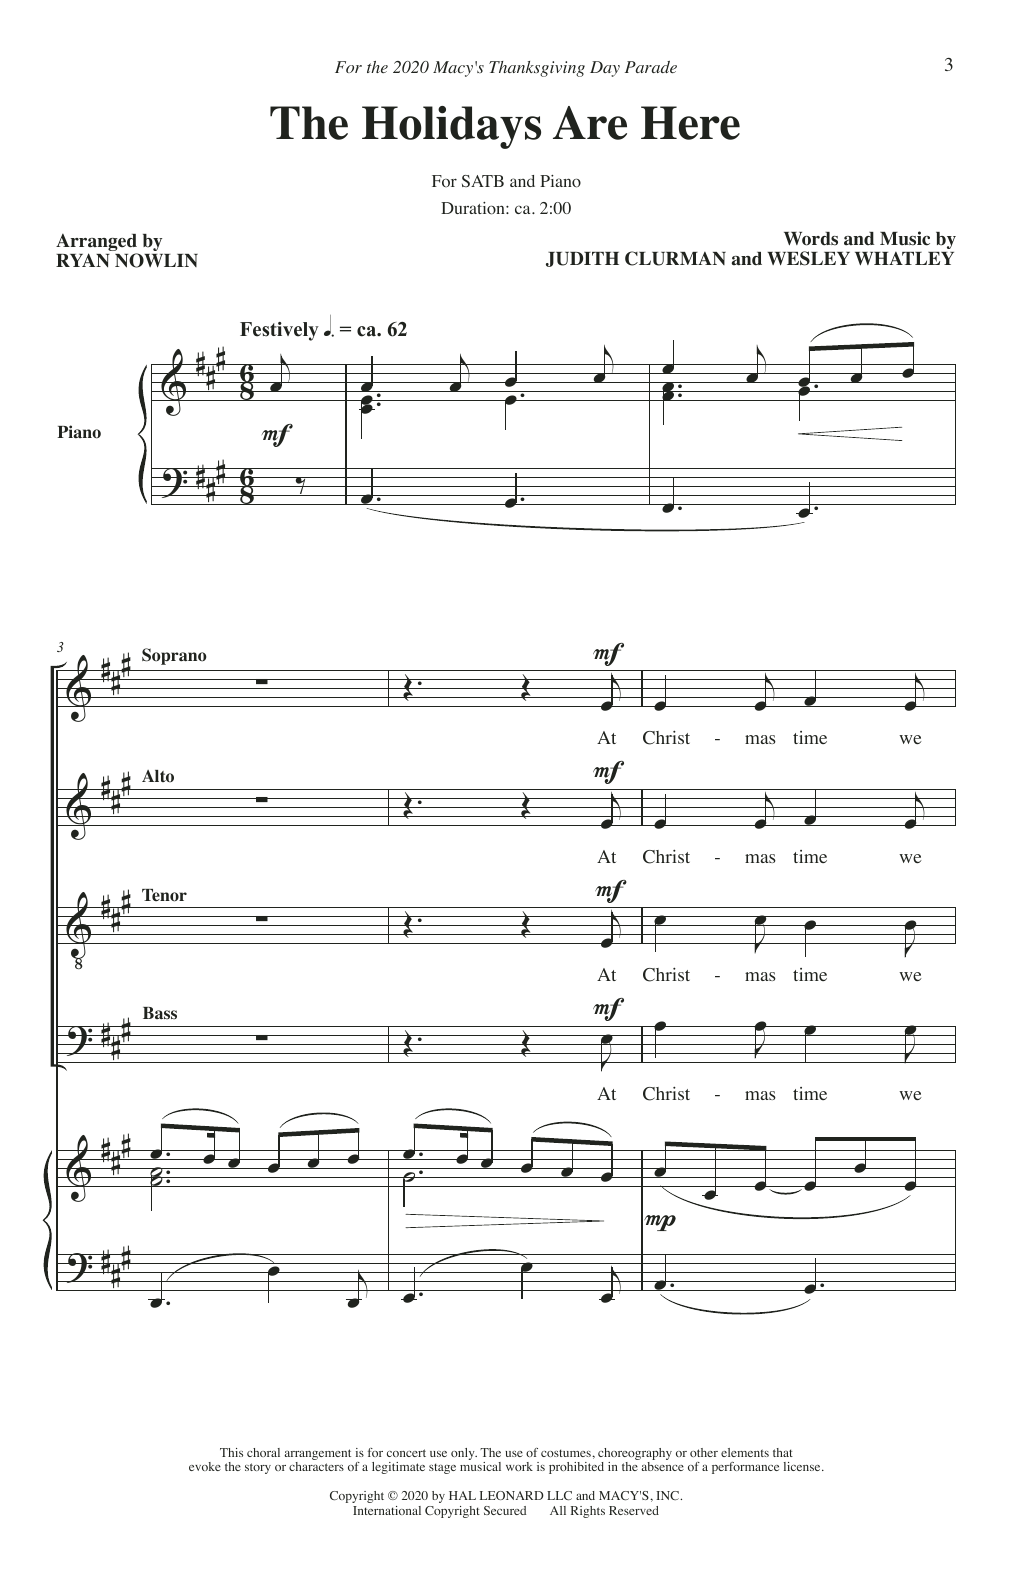 Download Judith Clurman & Wesley Whatley The Holidays Are Here (A Holiday Carol) Sheet Music